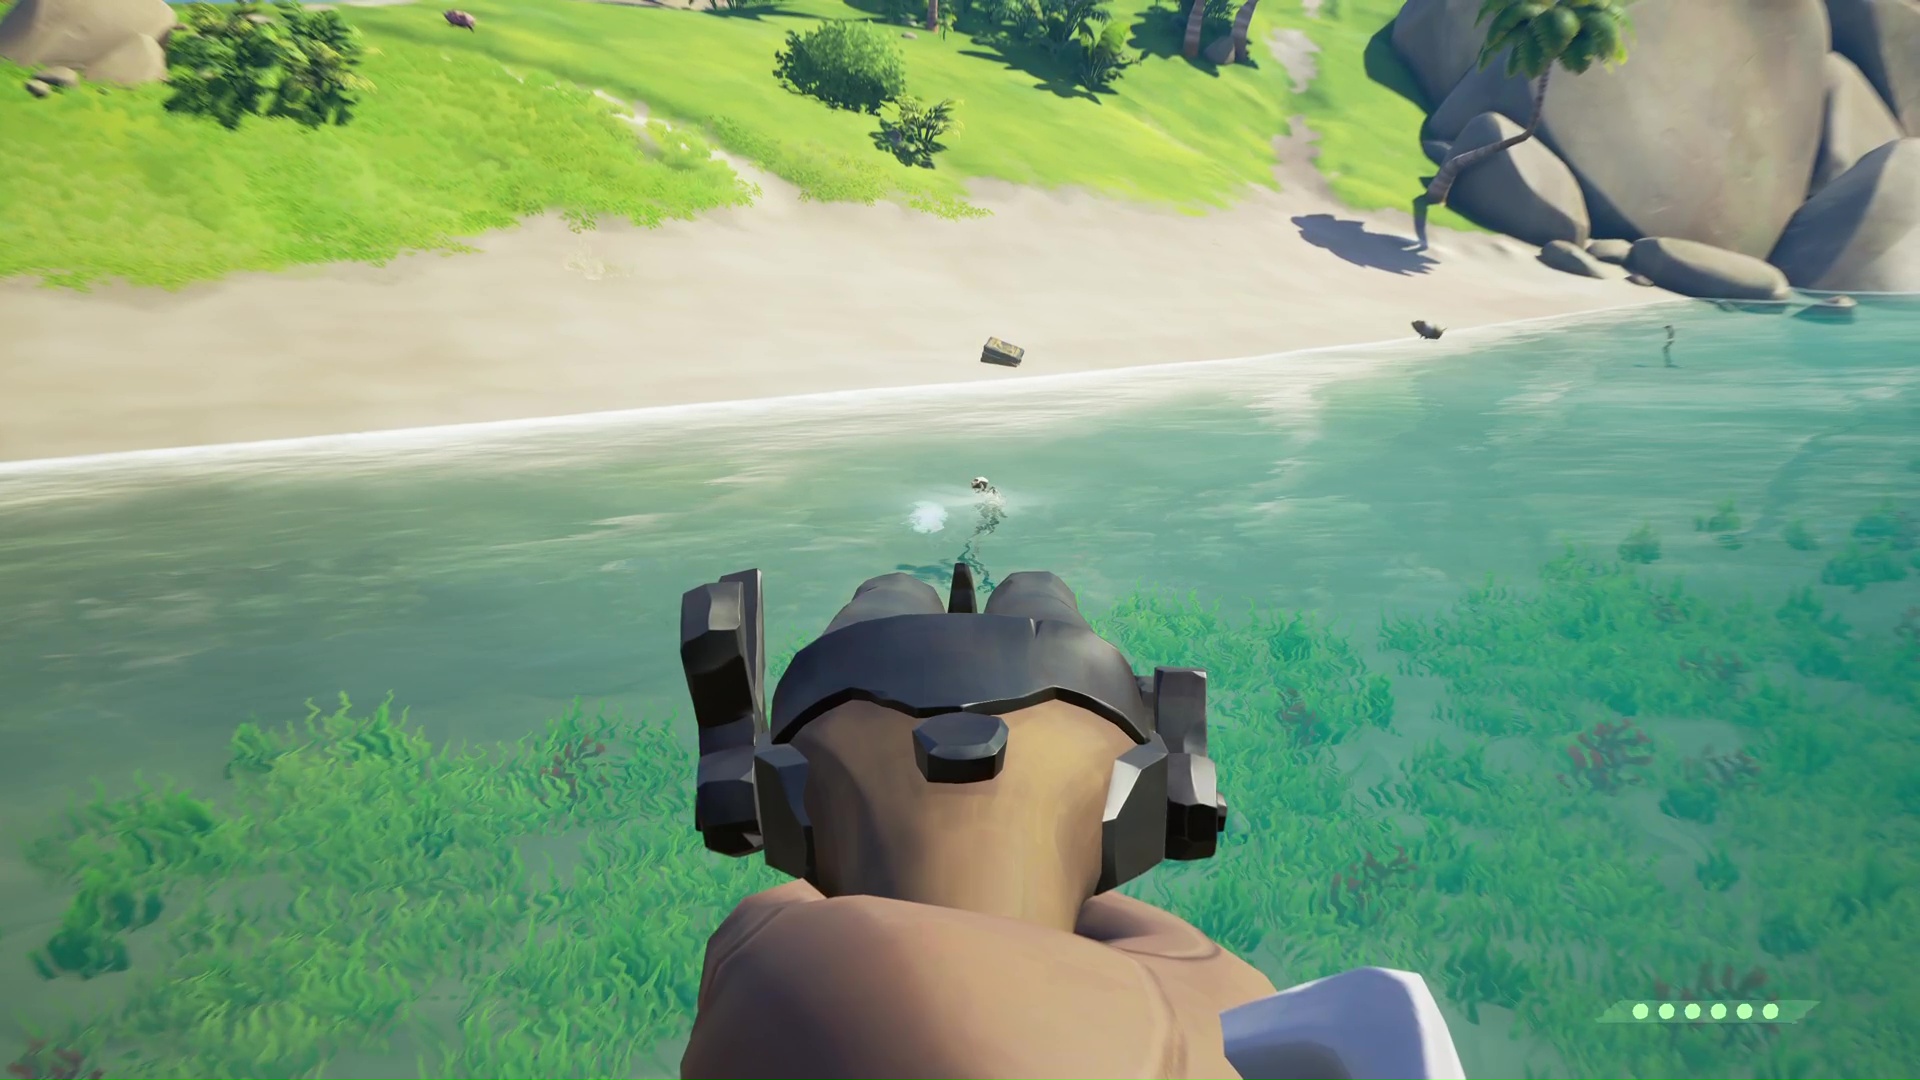 How to get the Double Barrel Pistol in Sea of Thieves